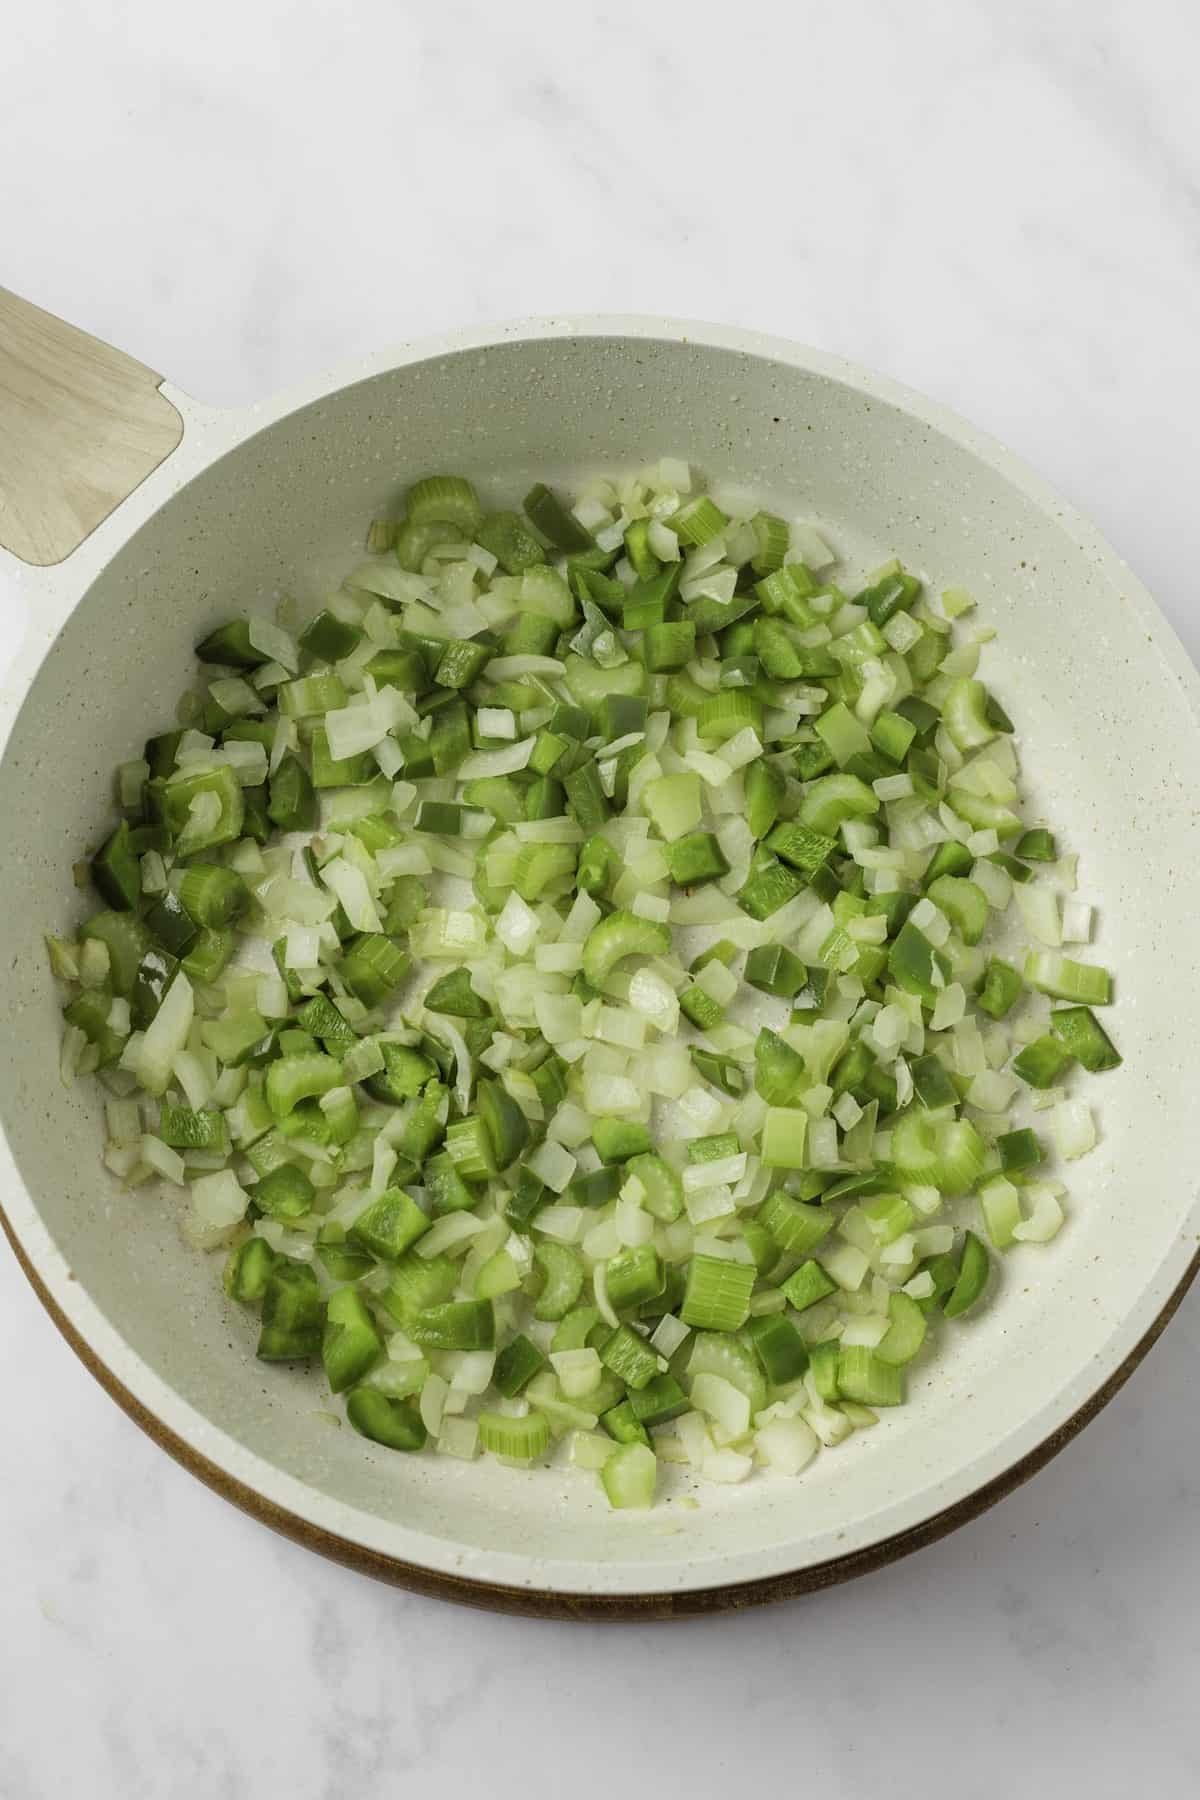 Sautéed celery, onion and green bell pepper in a pan.